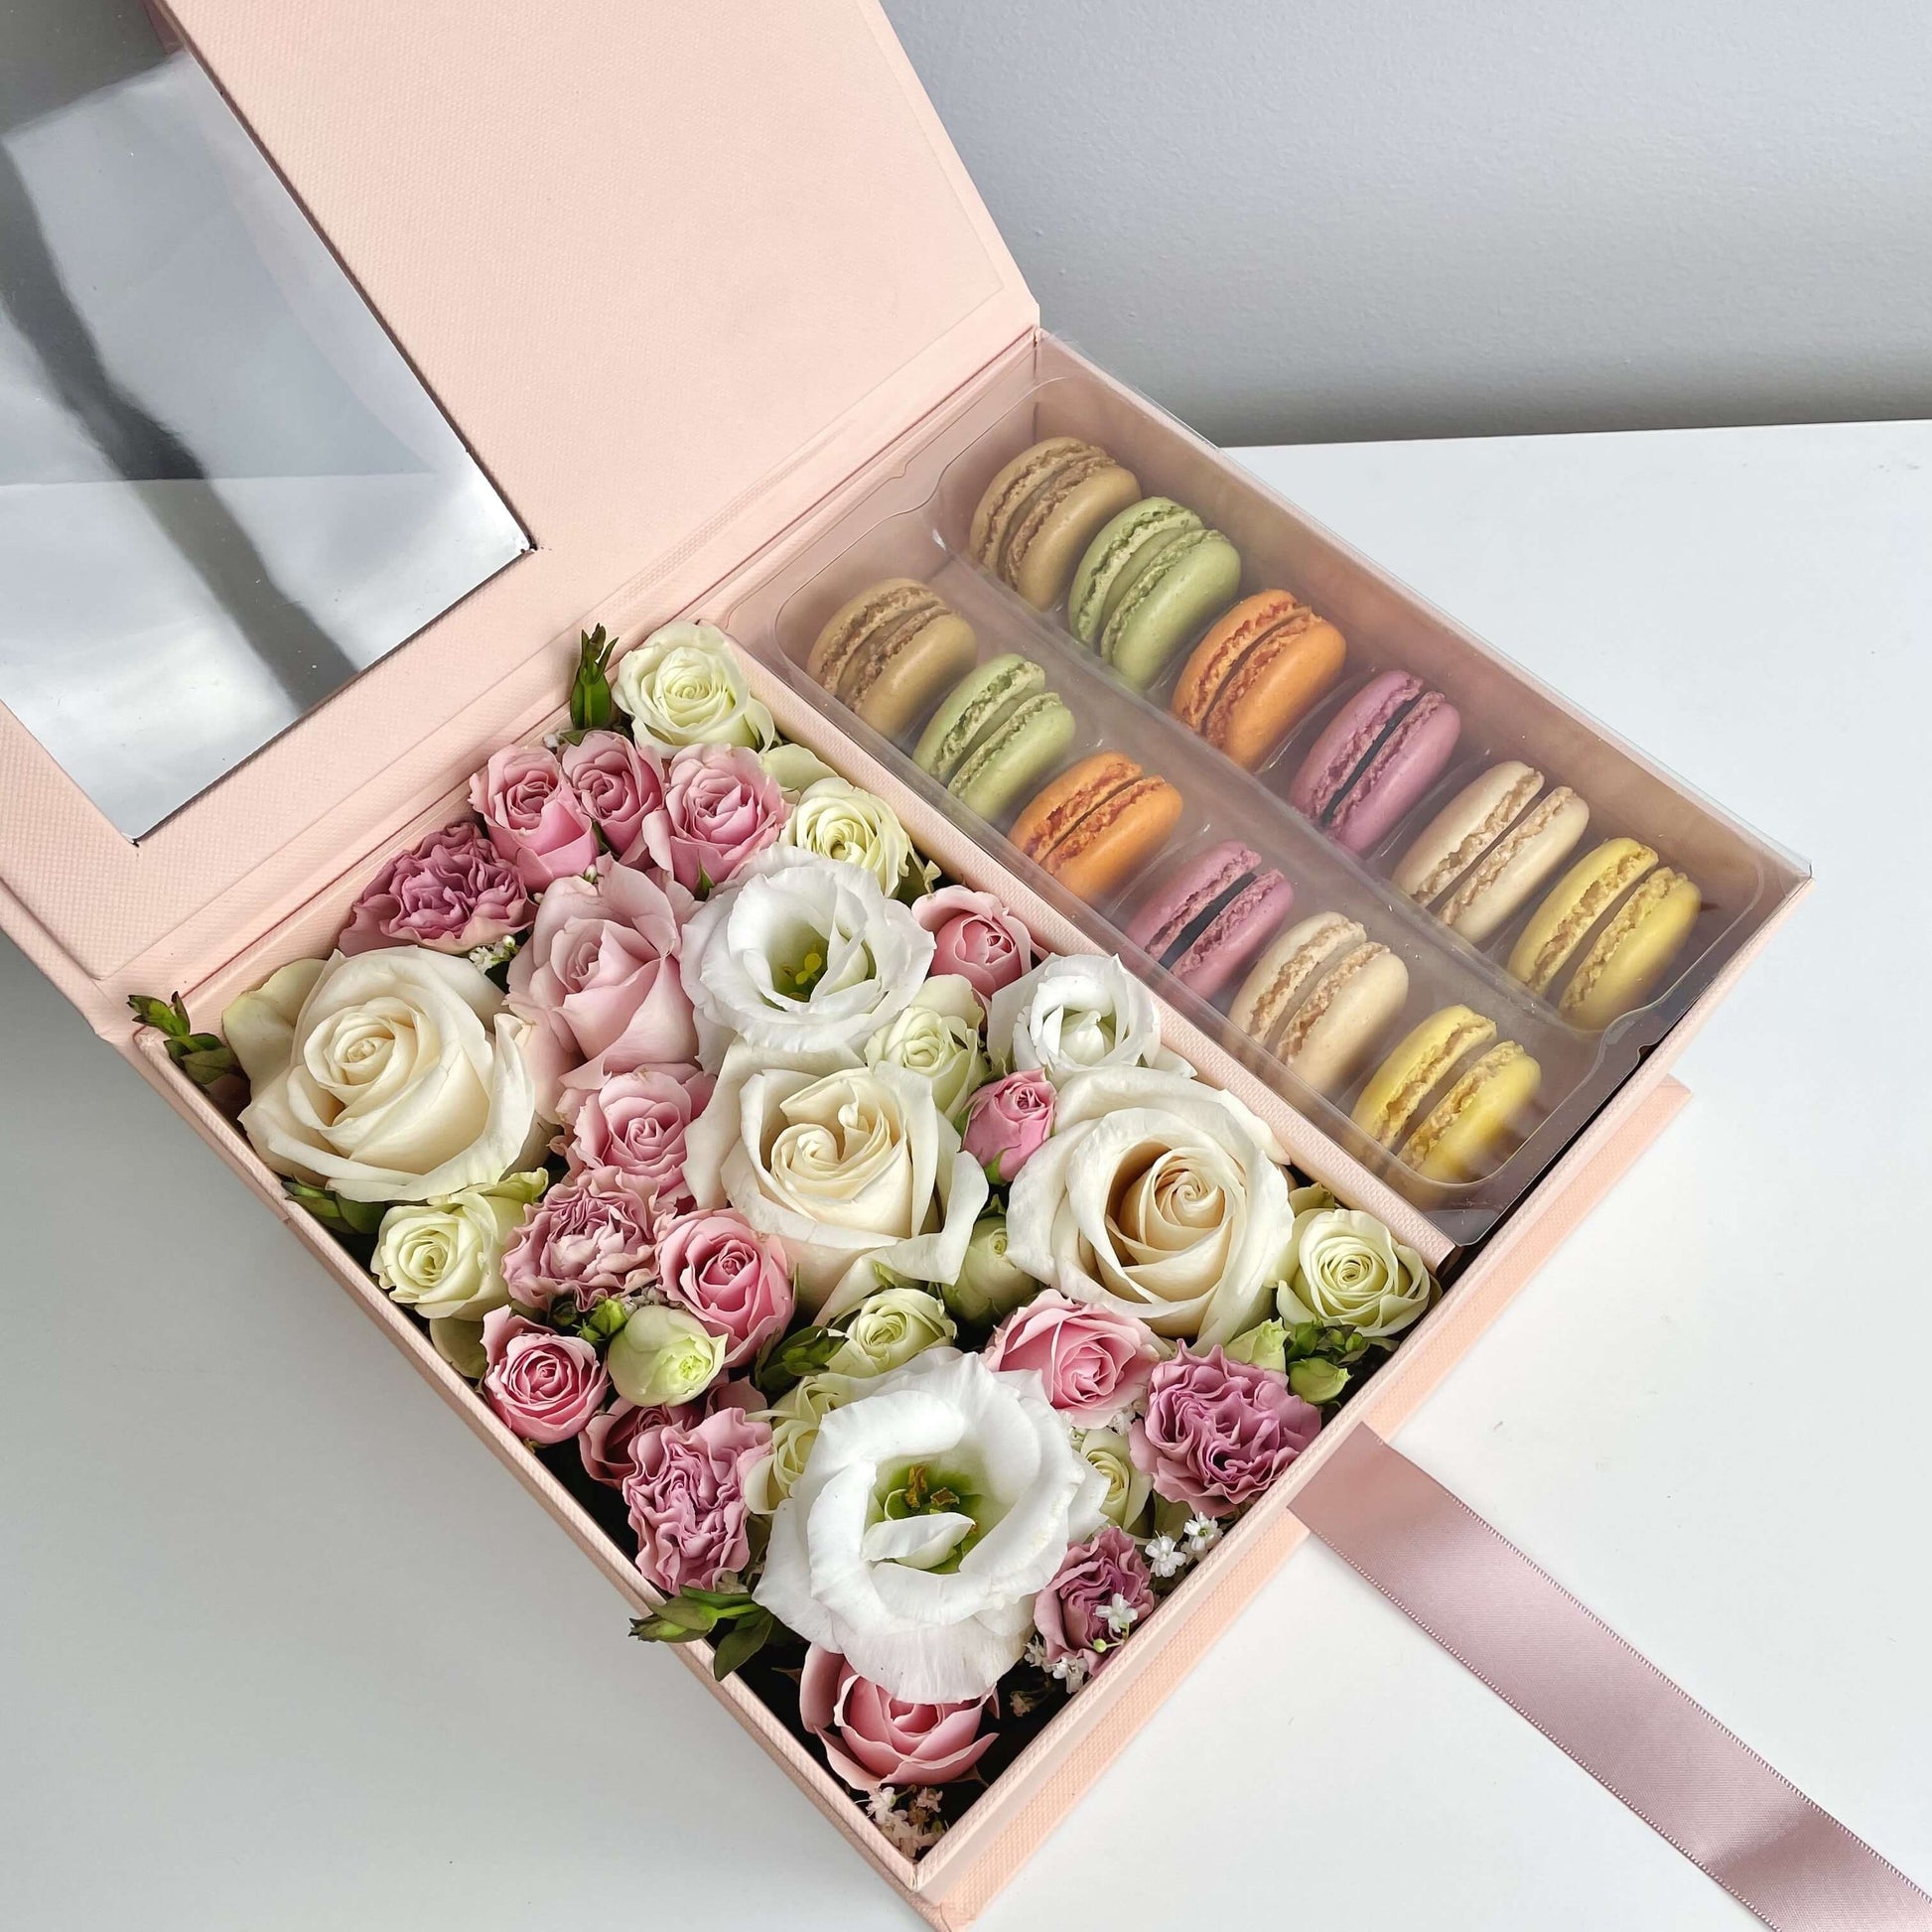 Close-up on Pink flower box with macarons featuring white and pink roses